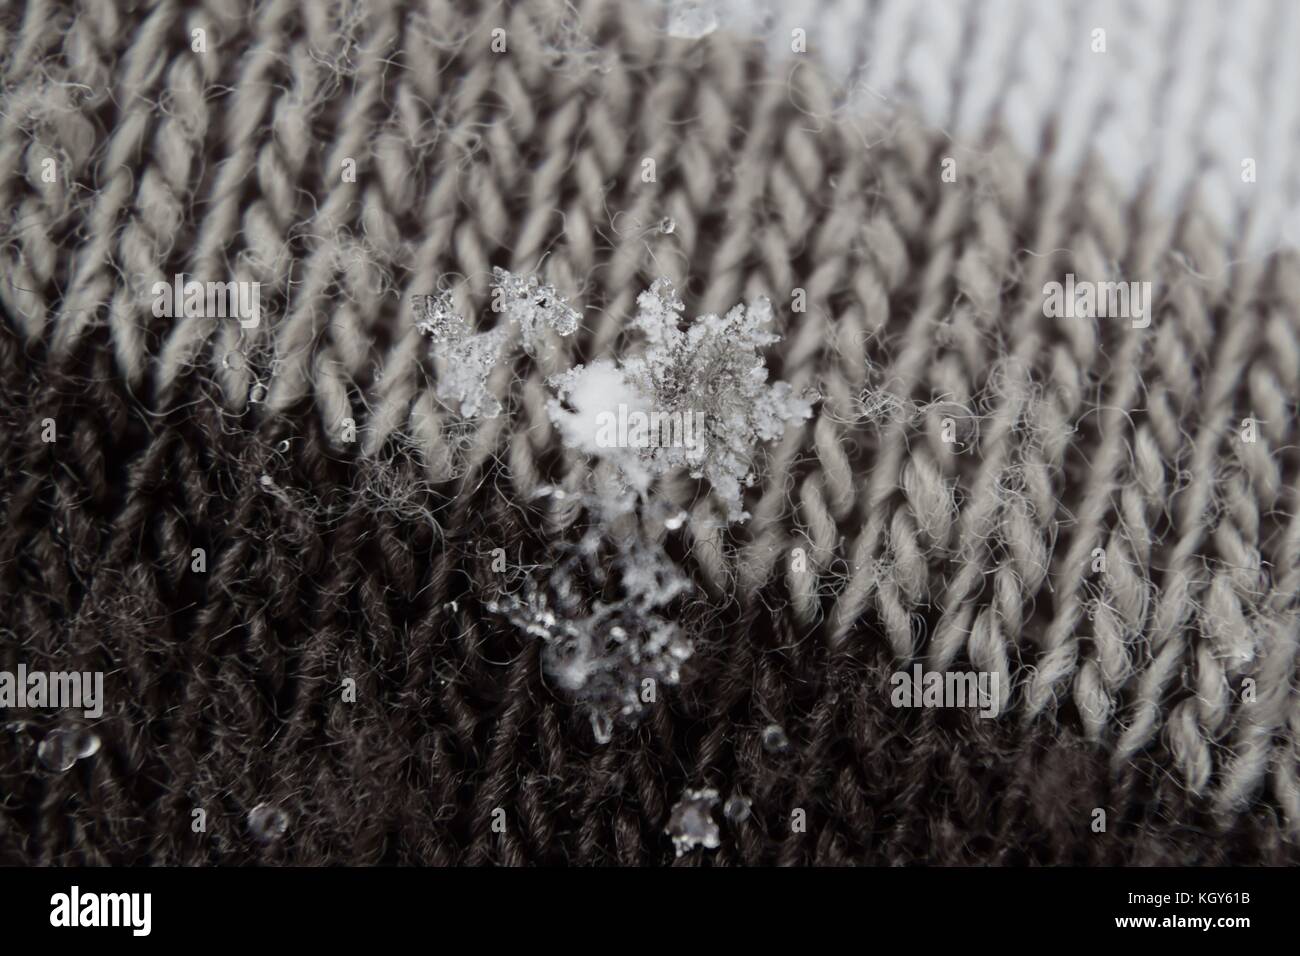 close up of snowflakes on knitted yarn glove during early snowfall Stock Photo